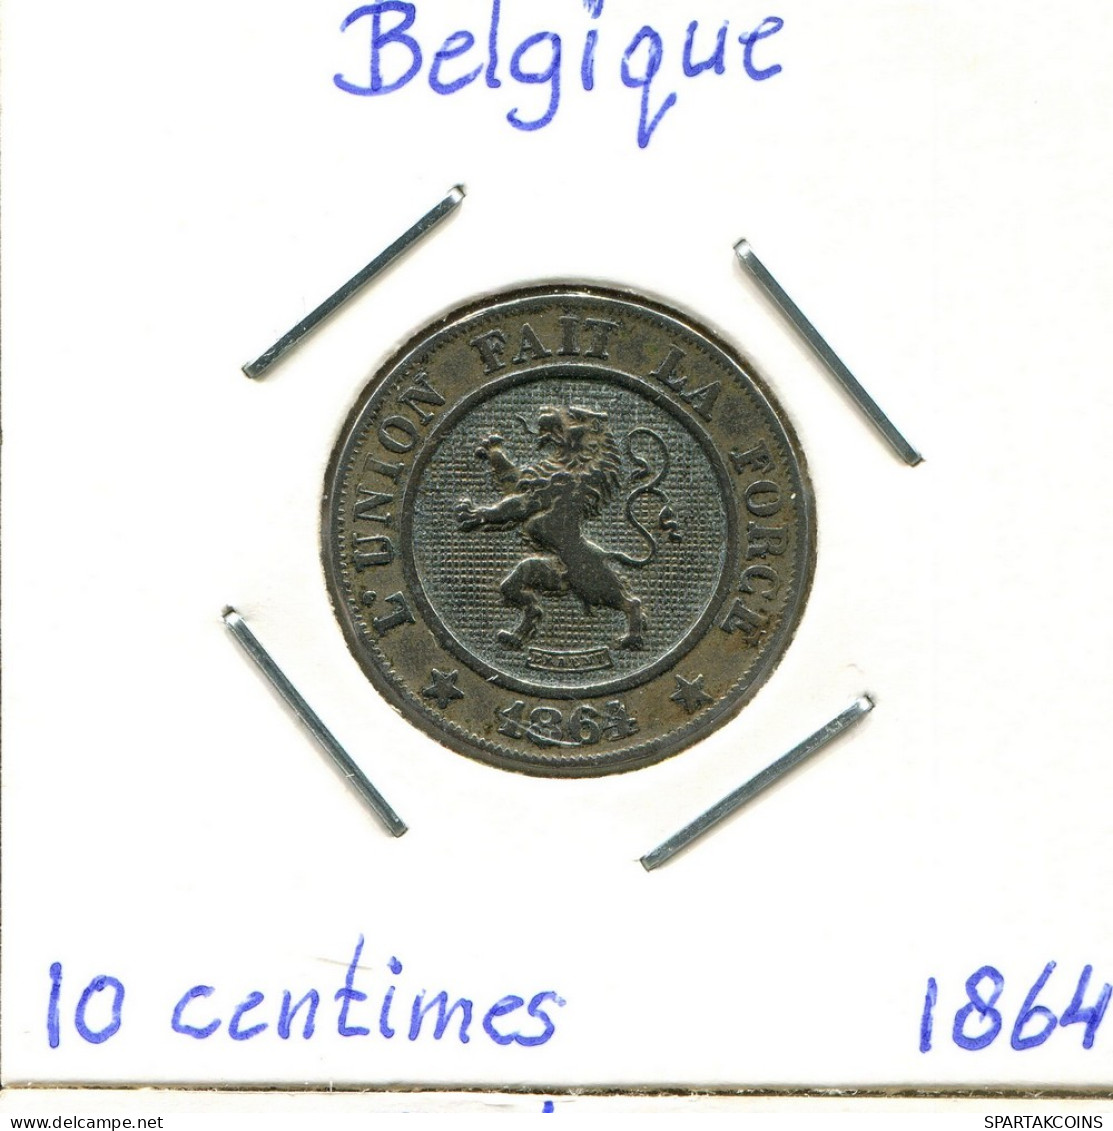 10 CENTIMES 1864 FRENCH Text BELGIUM Coin #BA270.U - 10 Cents